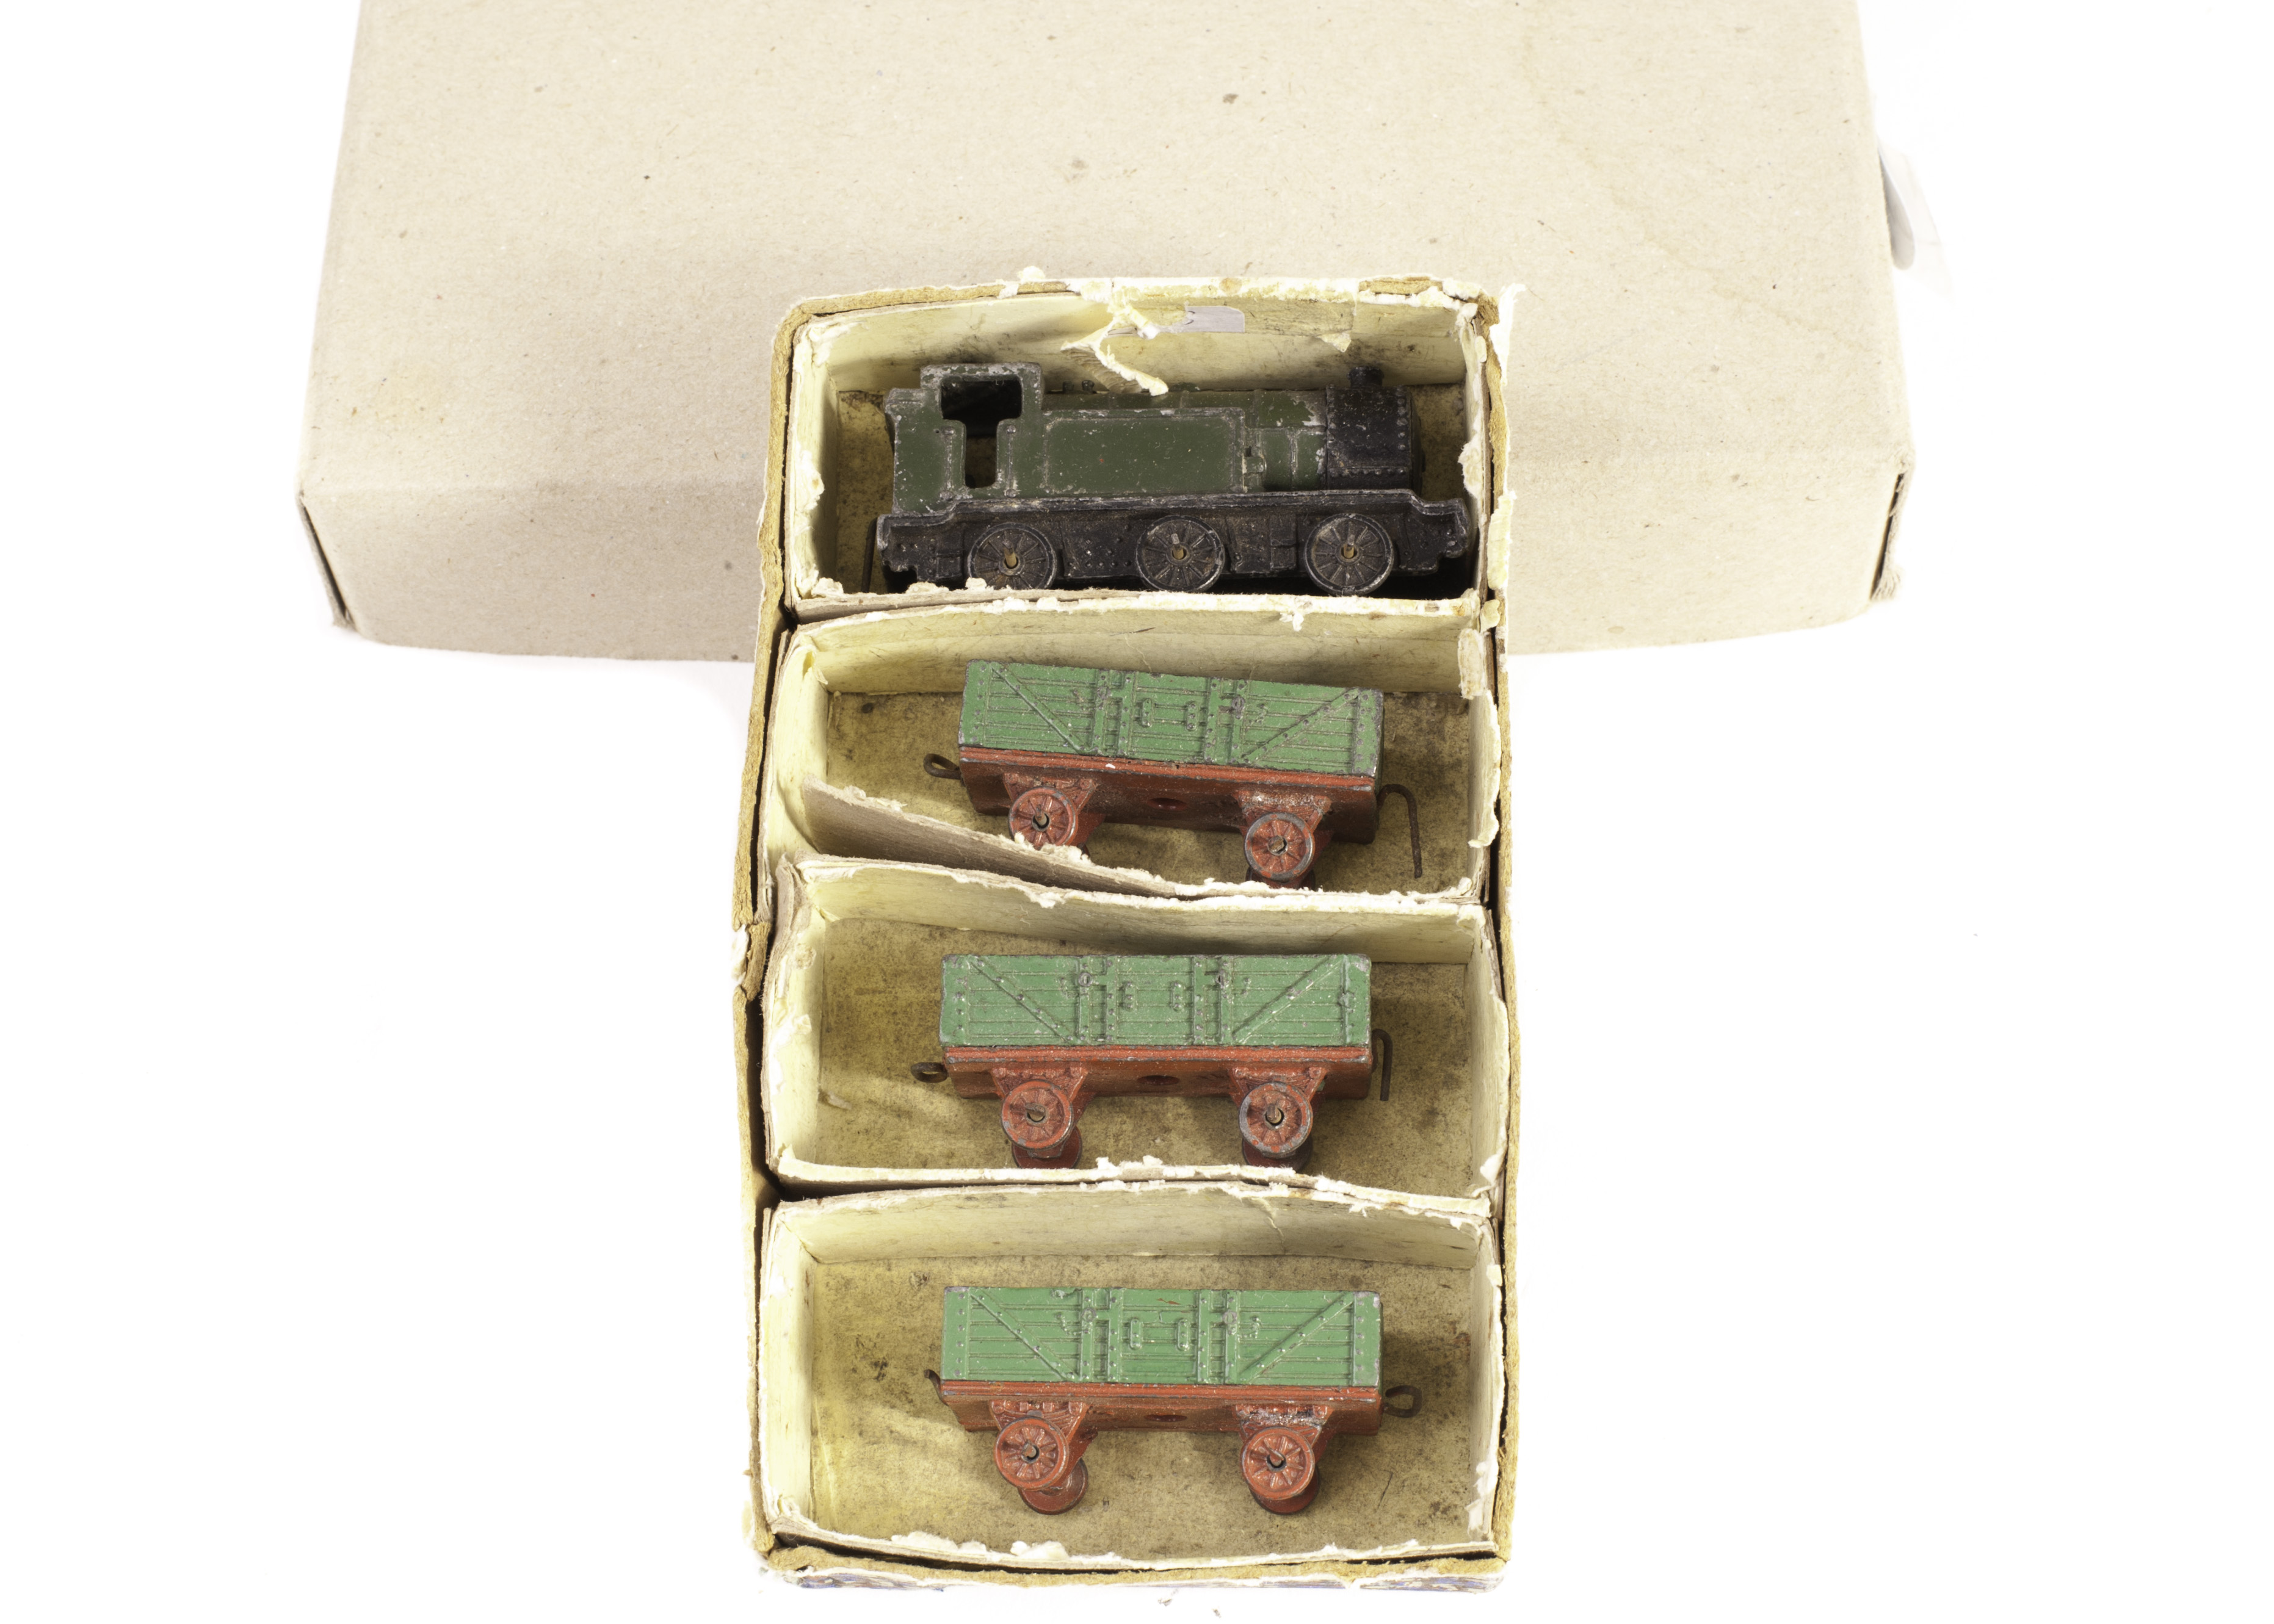 A Pre-War Dinky Toys 18 Tank Goods Train, comprising green 0-6-0 Tank Engine and three green and red